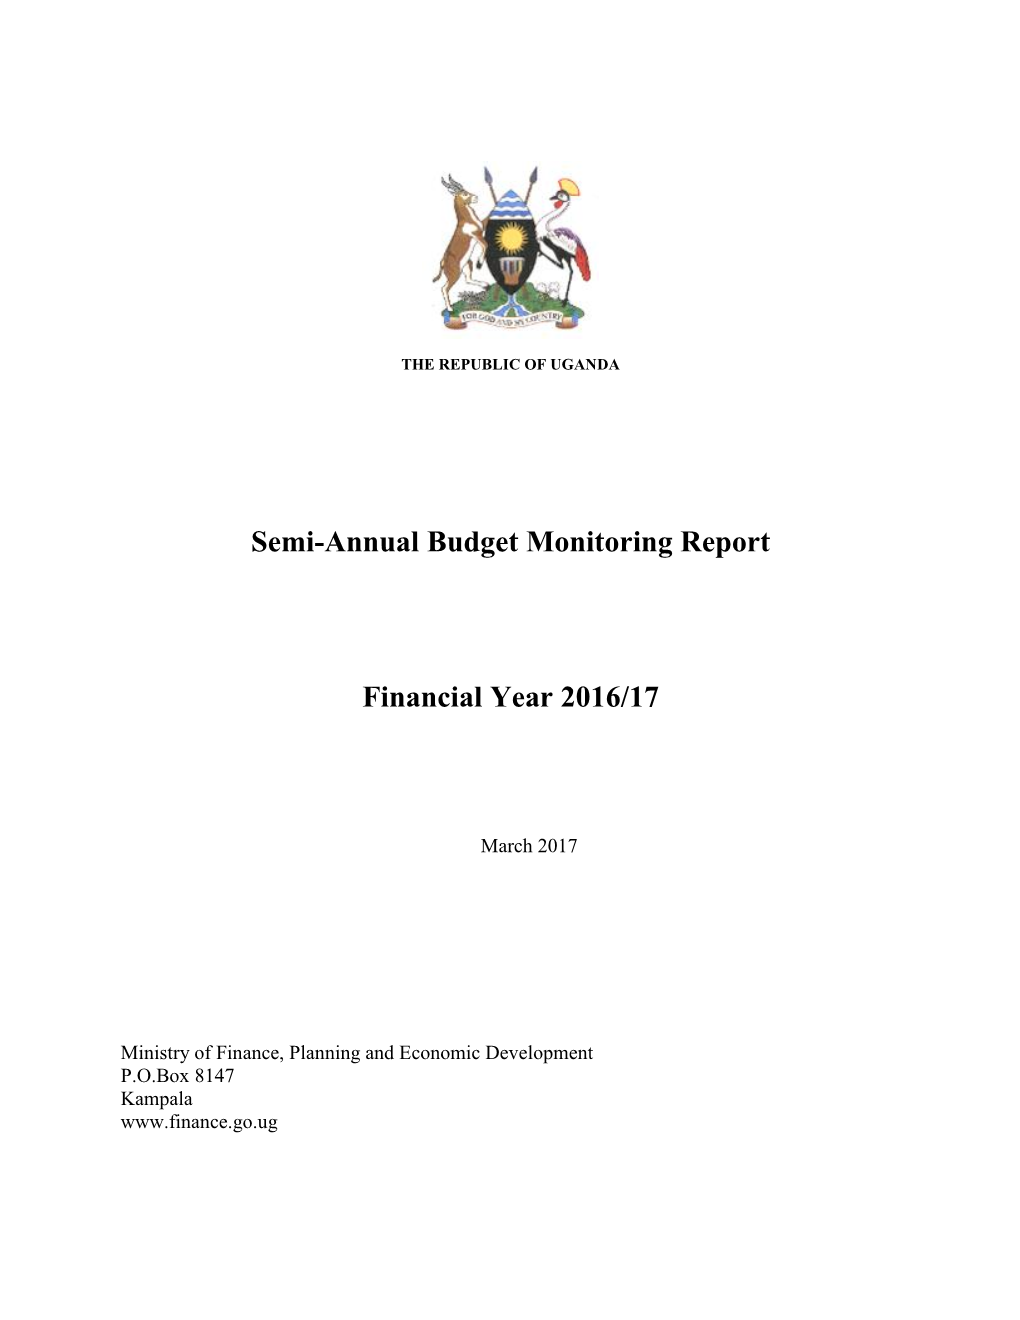 Semi-Annual Budget Monitoring Report Financial Year 2016/17